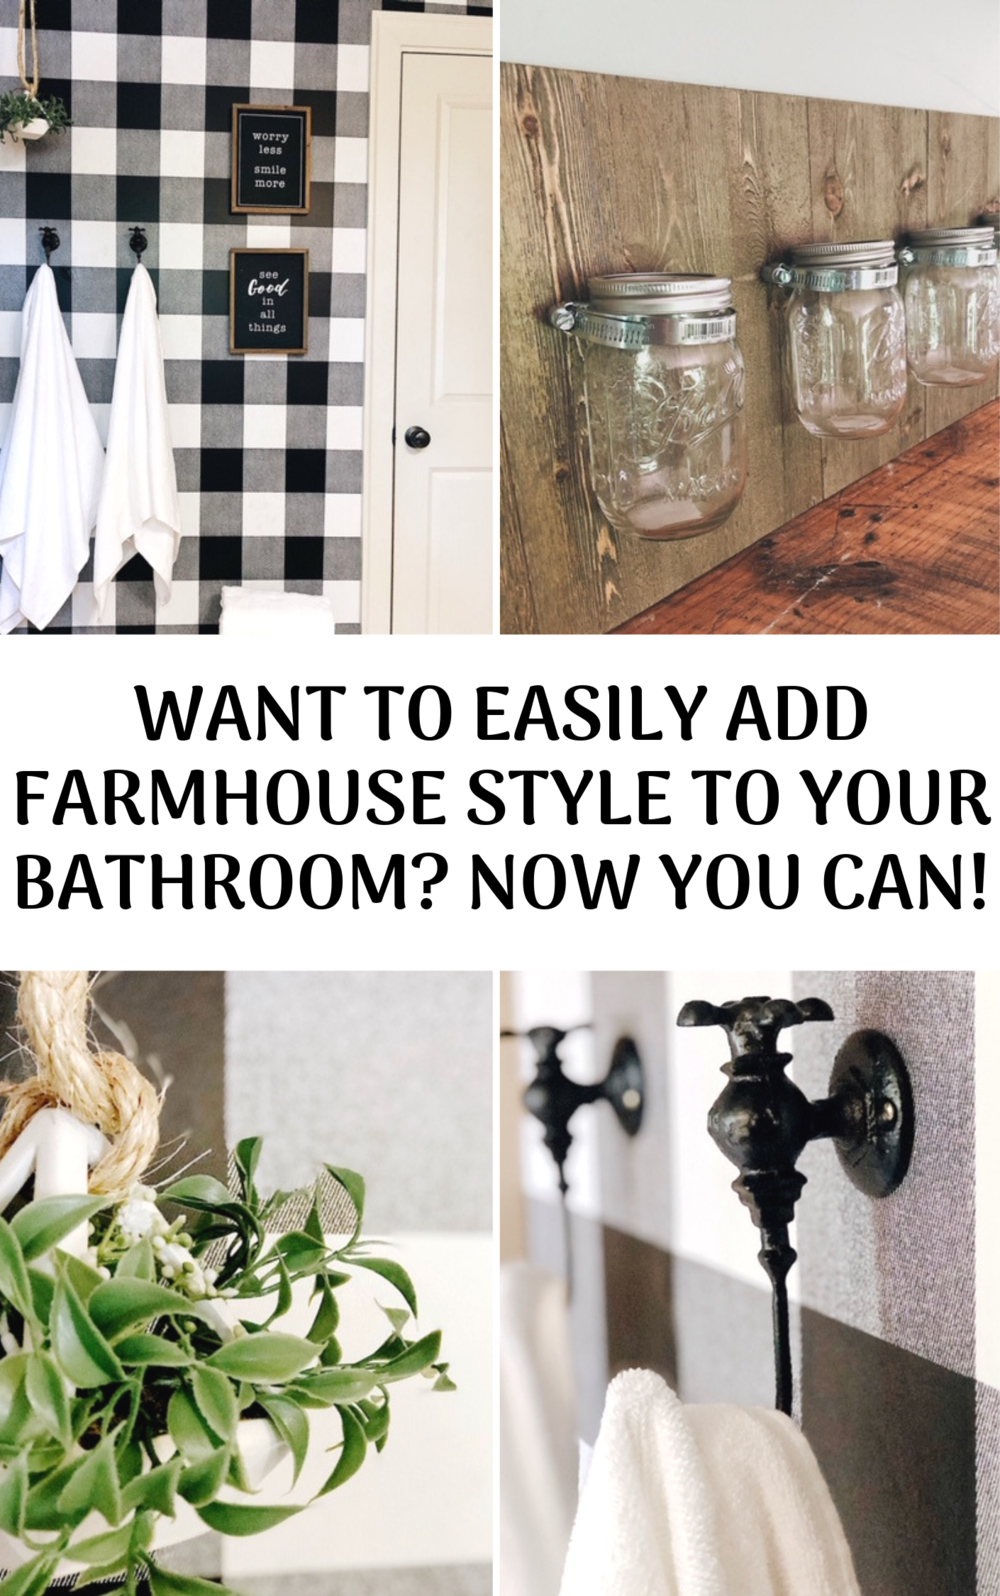 Want To Easily AddFarmhouseStyleToYourBathroom?NowYouCan!.png